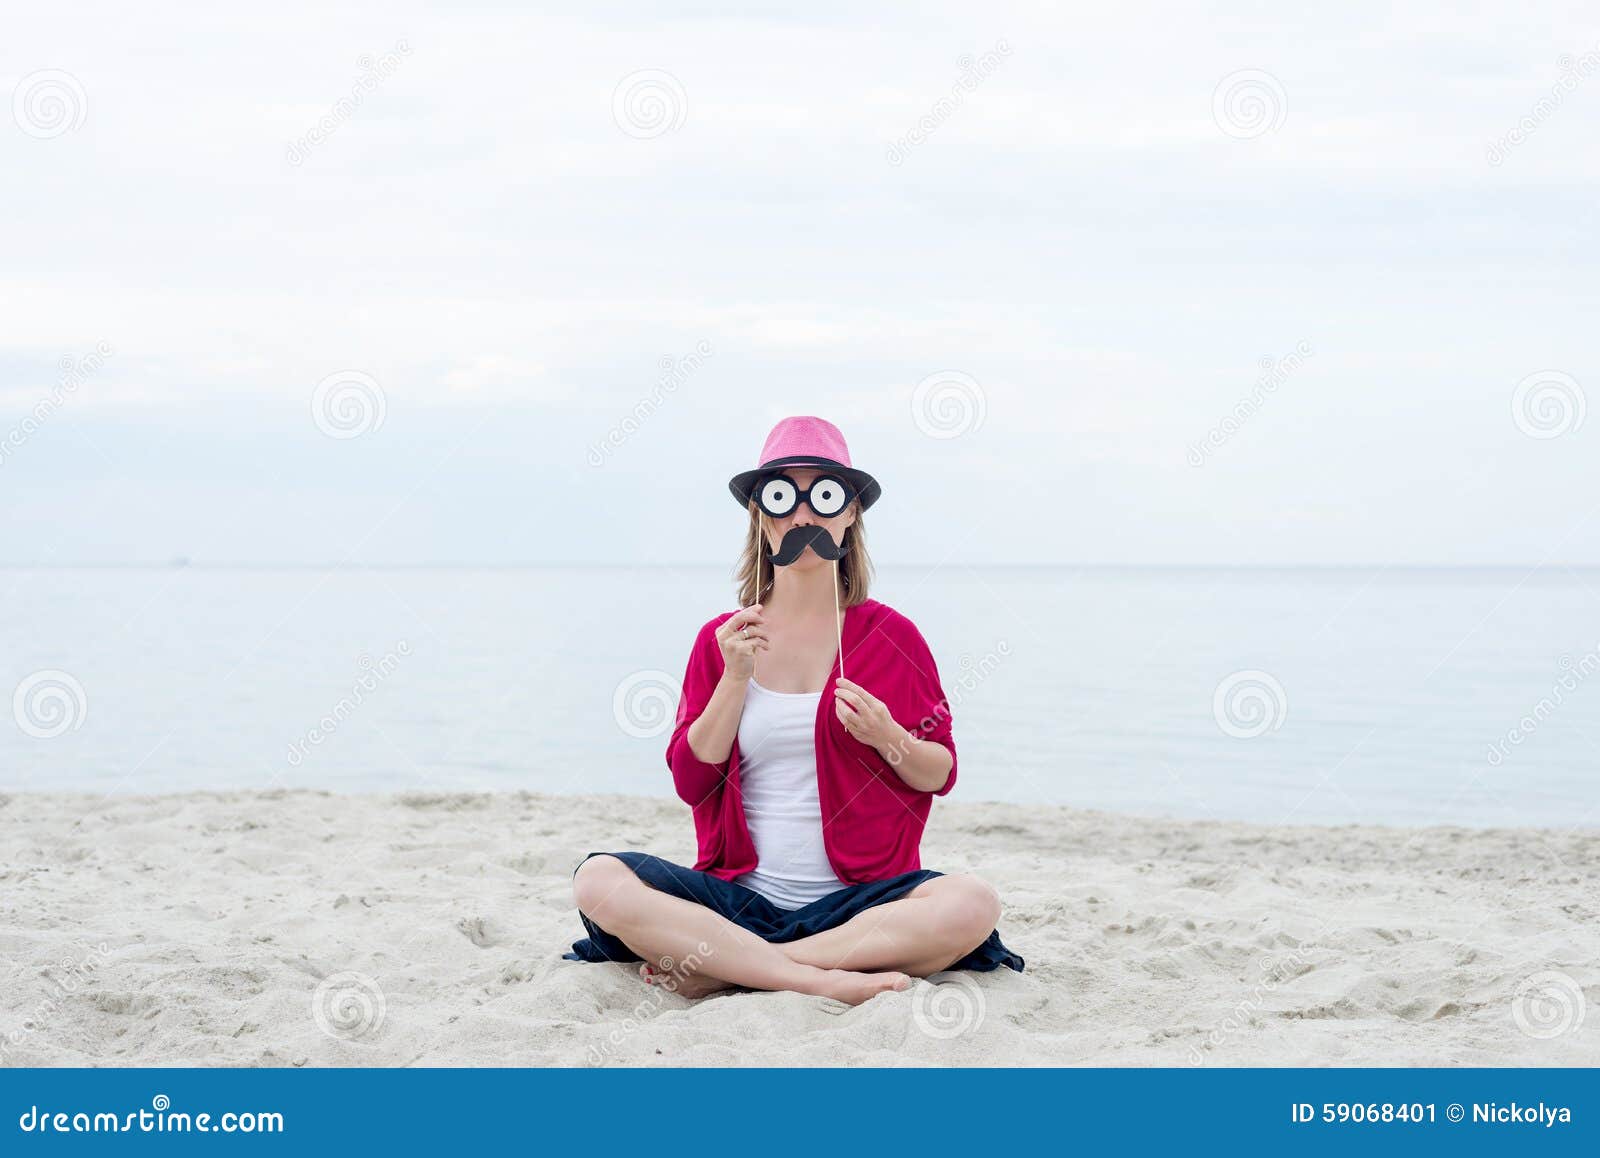 Funny woman on a beach stock image. Image of celebration - 59068401